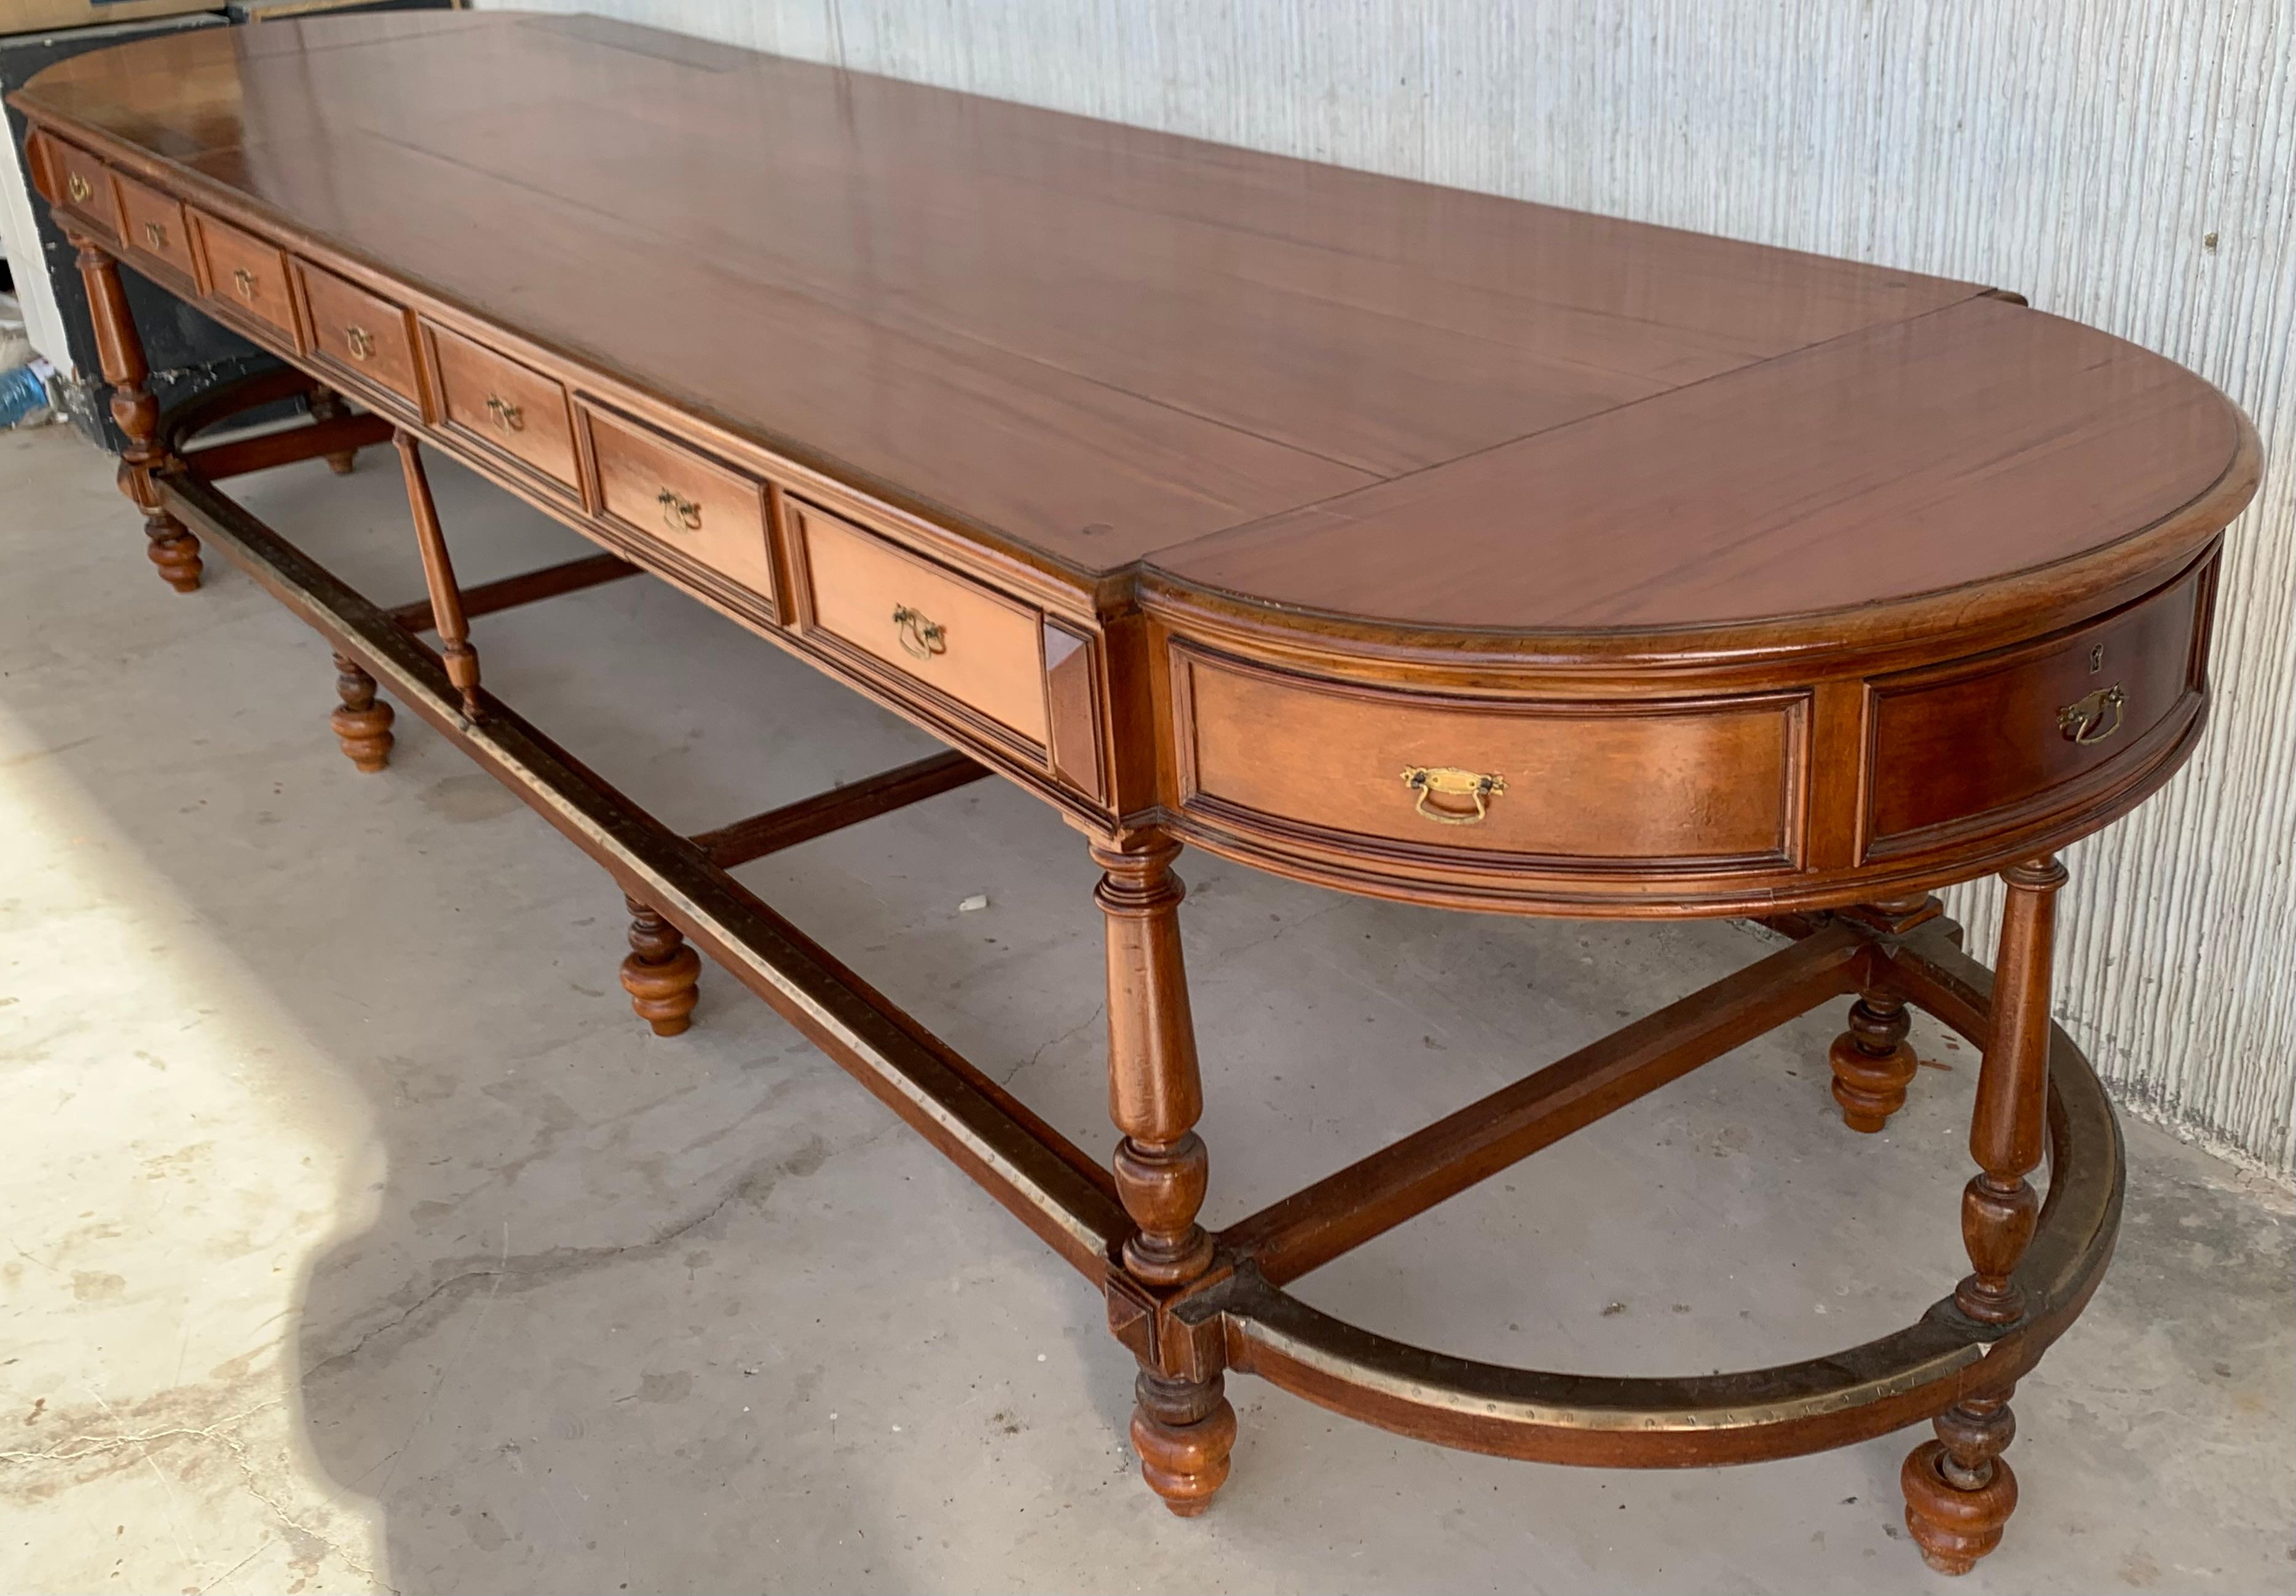 12 Foot Oval Center Table with Drawers in Both Sides, 20th Century For Sale 1